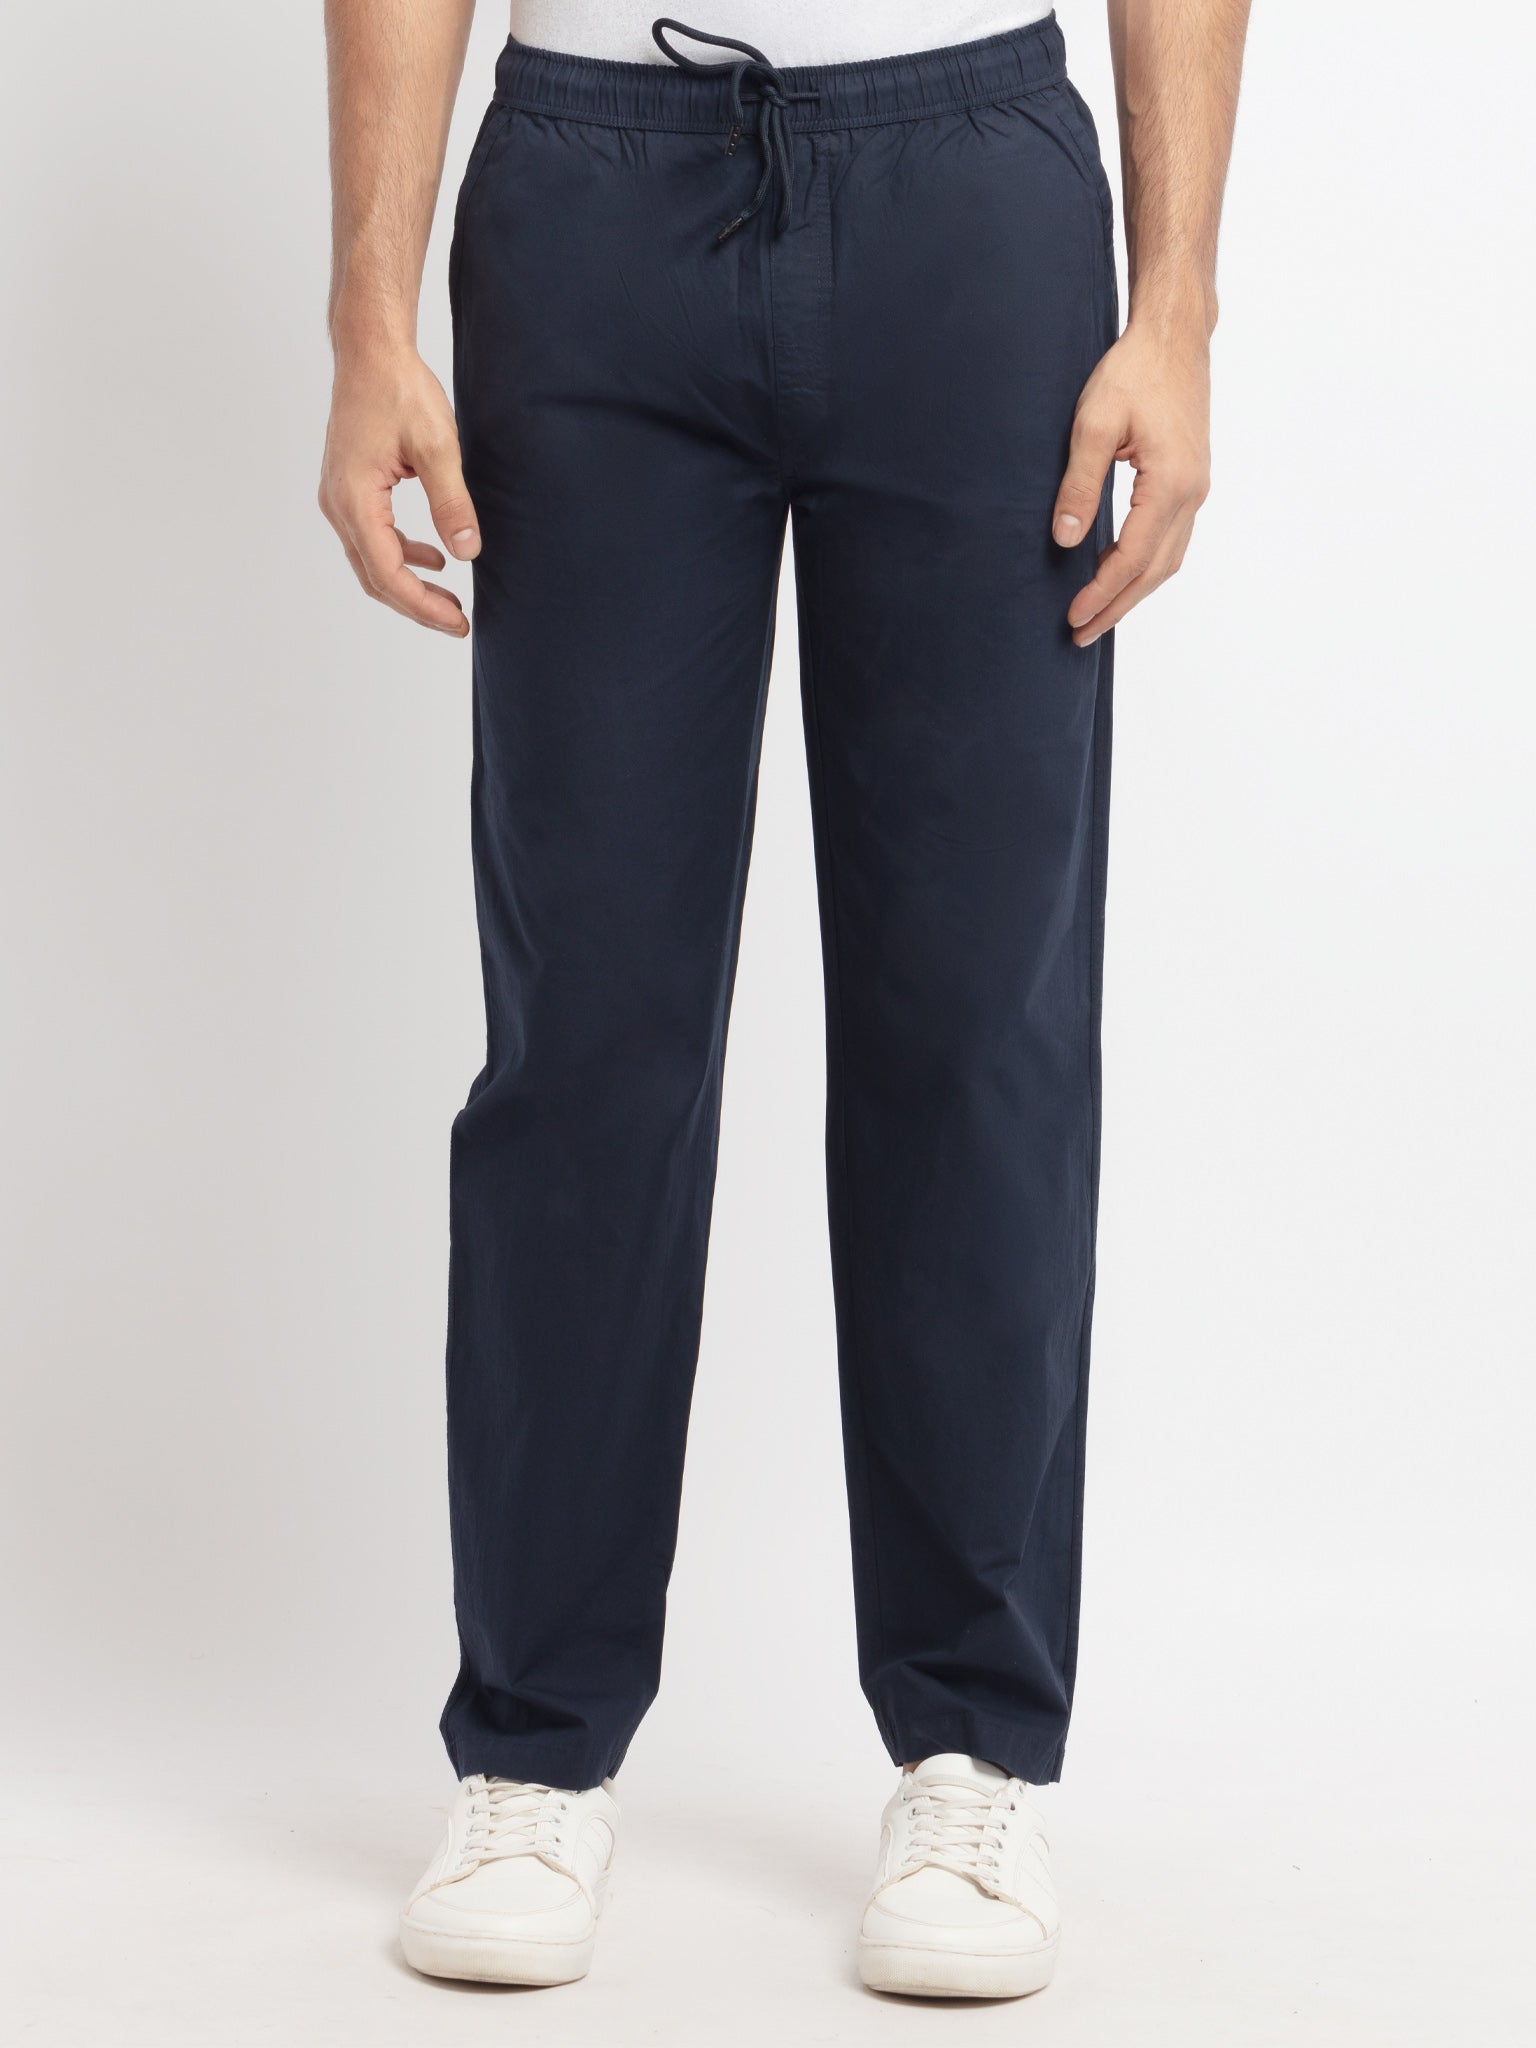 track pants for plus size